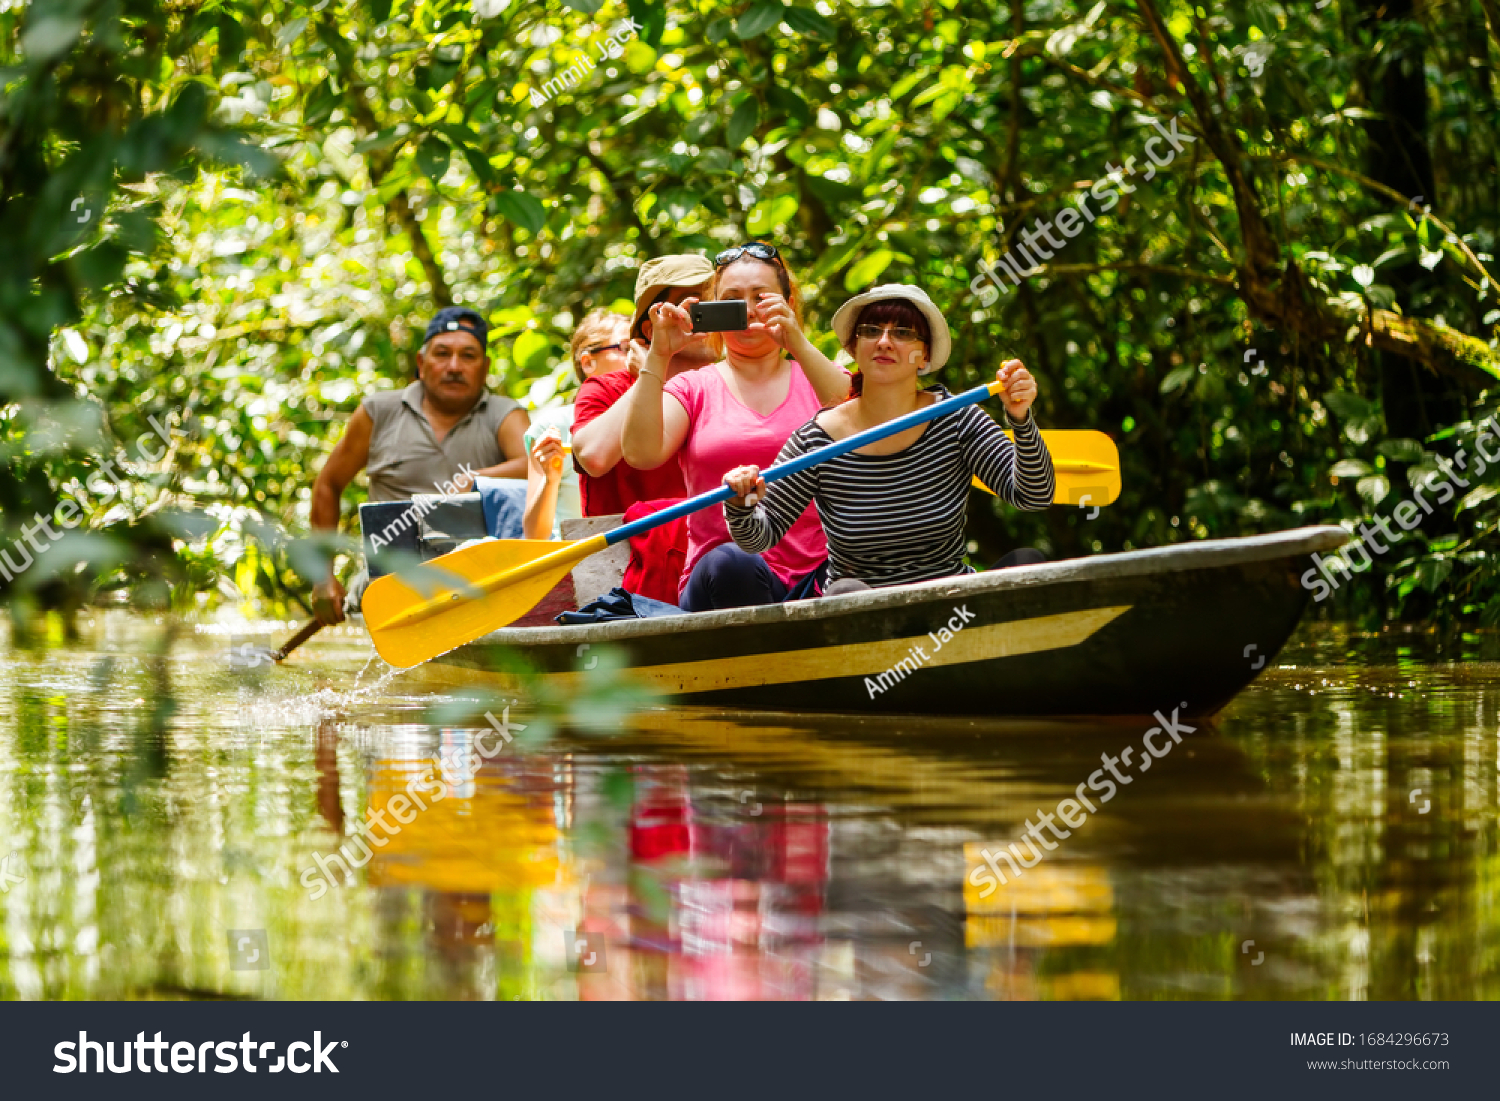 A group of tourists on a boat in the Amazon jungle, fishing and exploring the river while surrounded by lush wildlife and a vibrant community. #1684296673